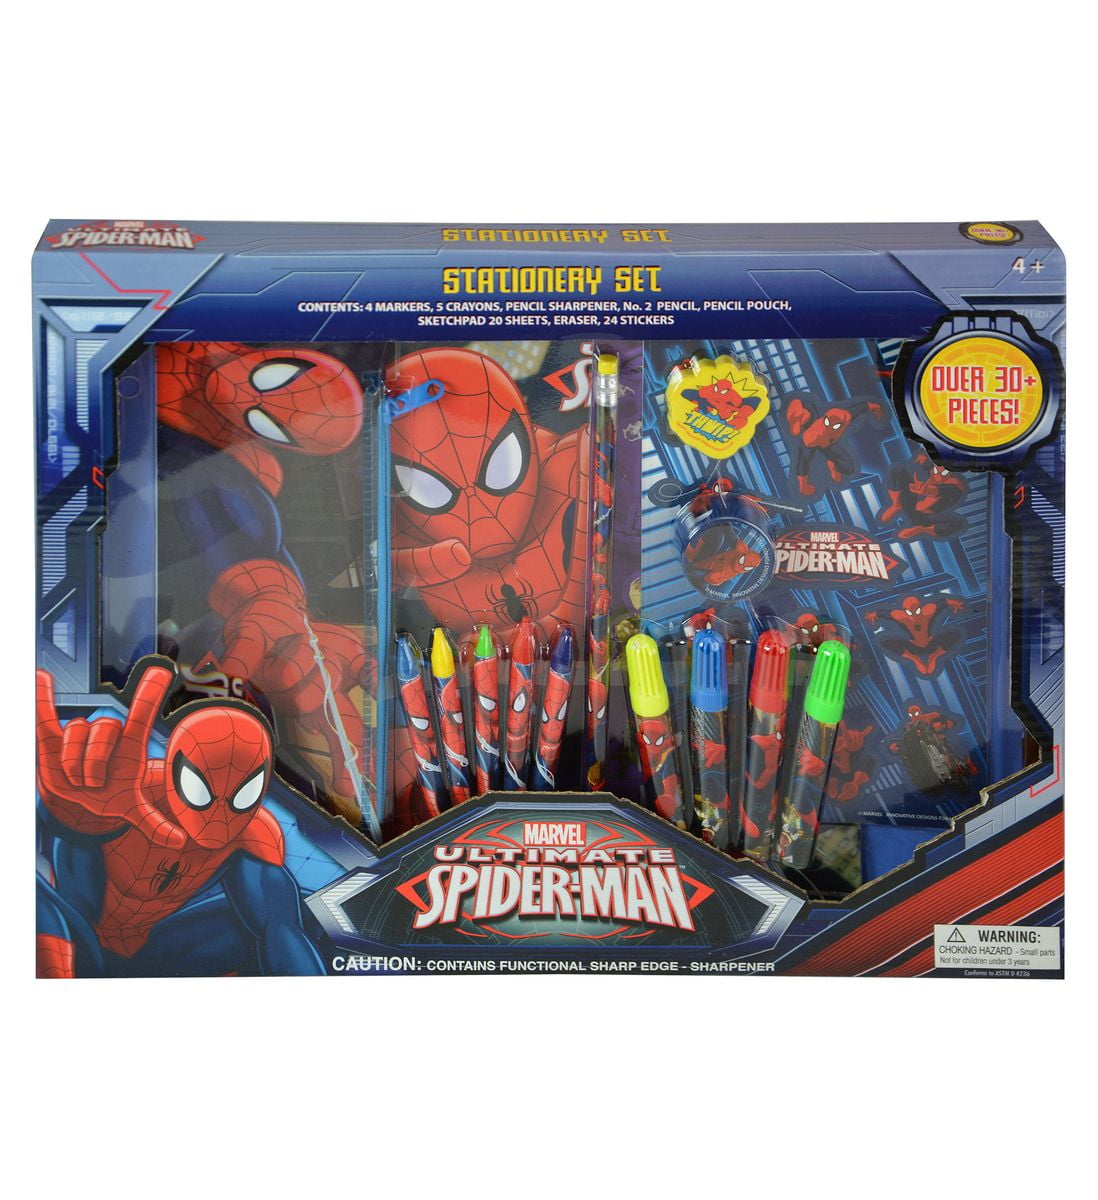 NEW Marvel Ultimate Spider-Man 7 Piece Fun Calculator Set and Notebook Pencils